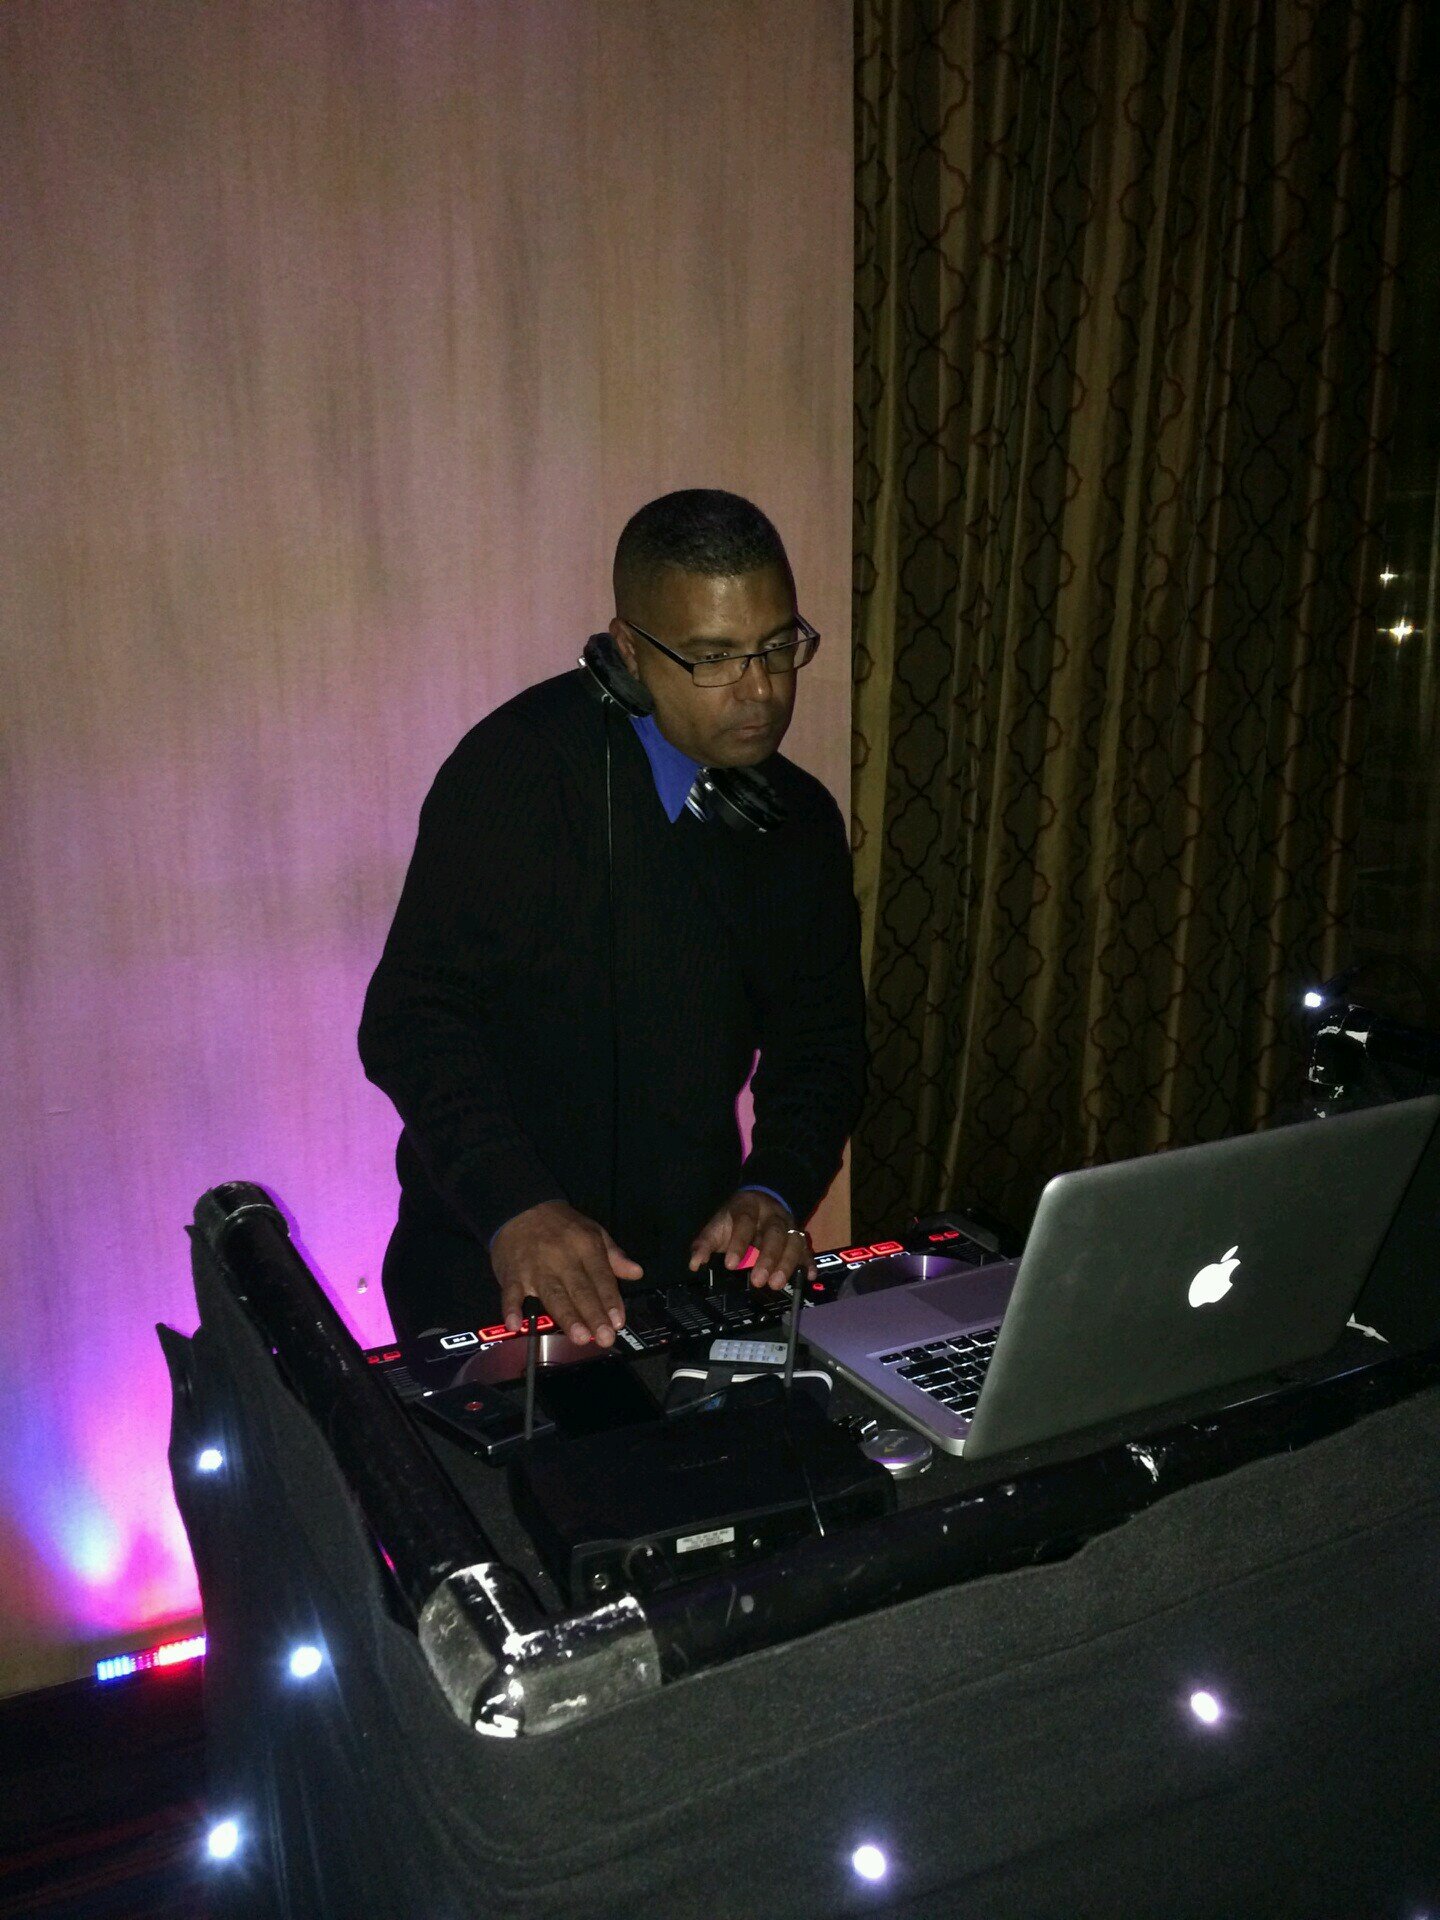 I am a DJ and the owner of Club Choices Entertainment. I specialize in playing all genres of music: Latin, Old School, Rock, Top 40, R&B, Reggae, & Country!